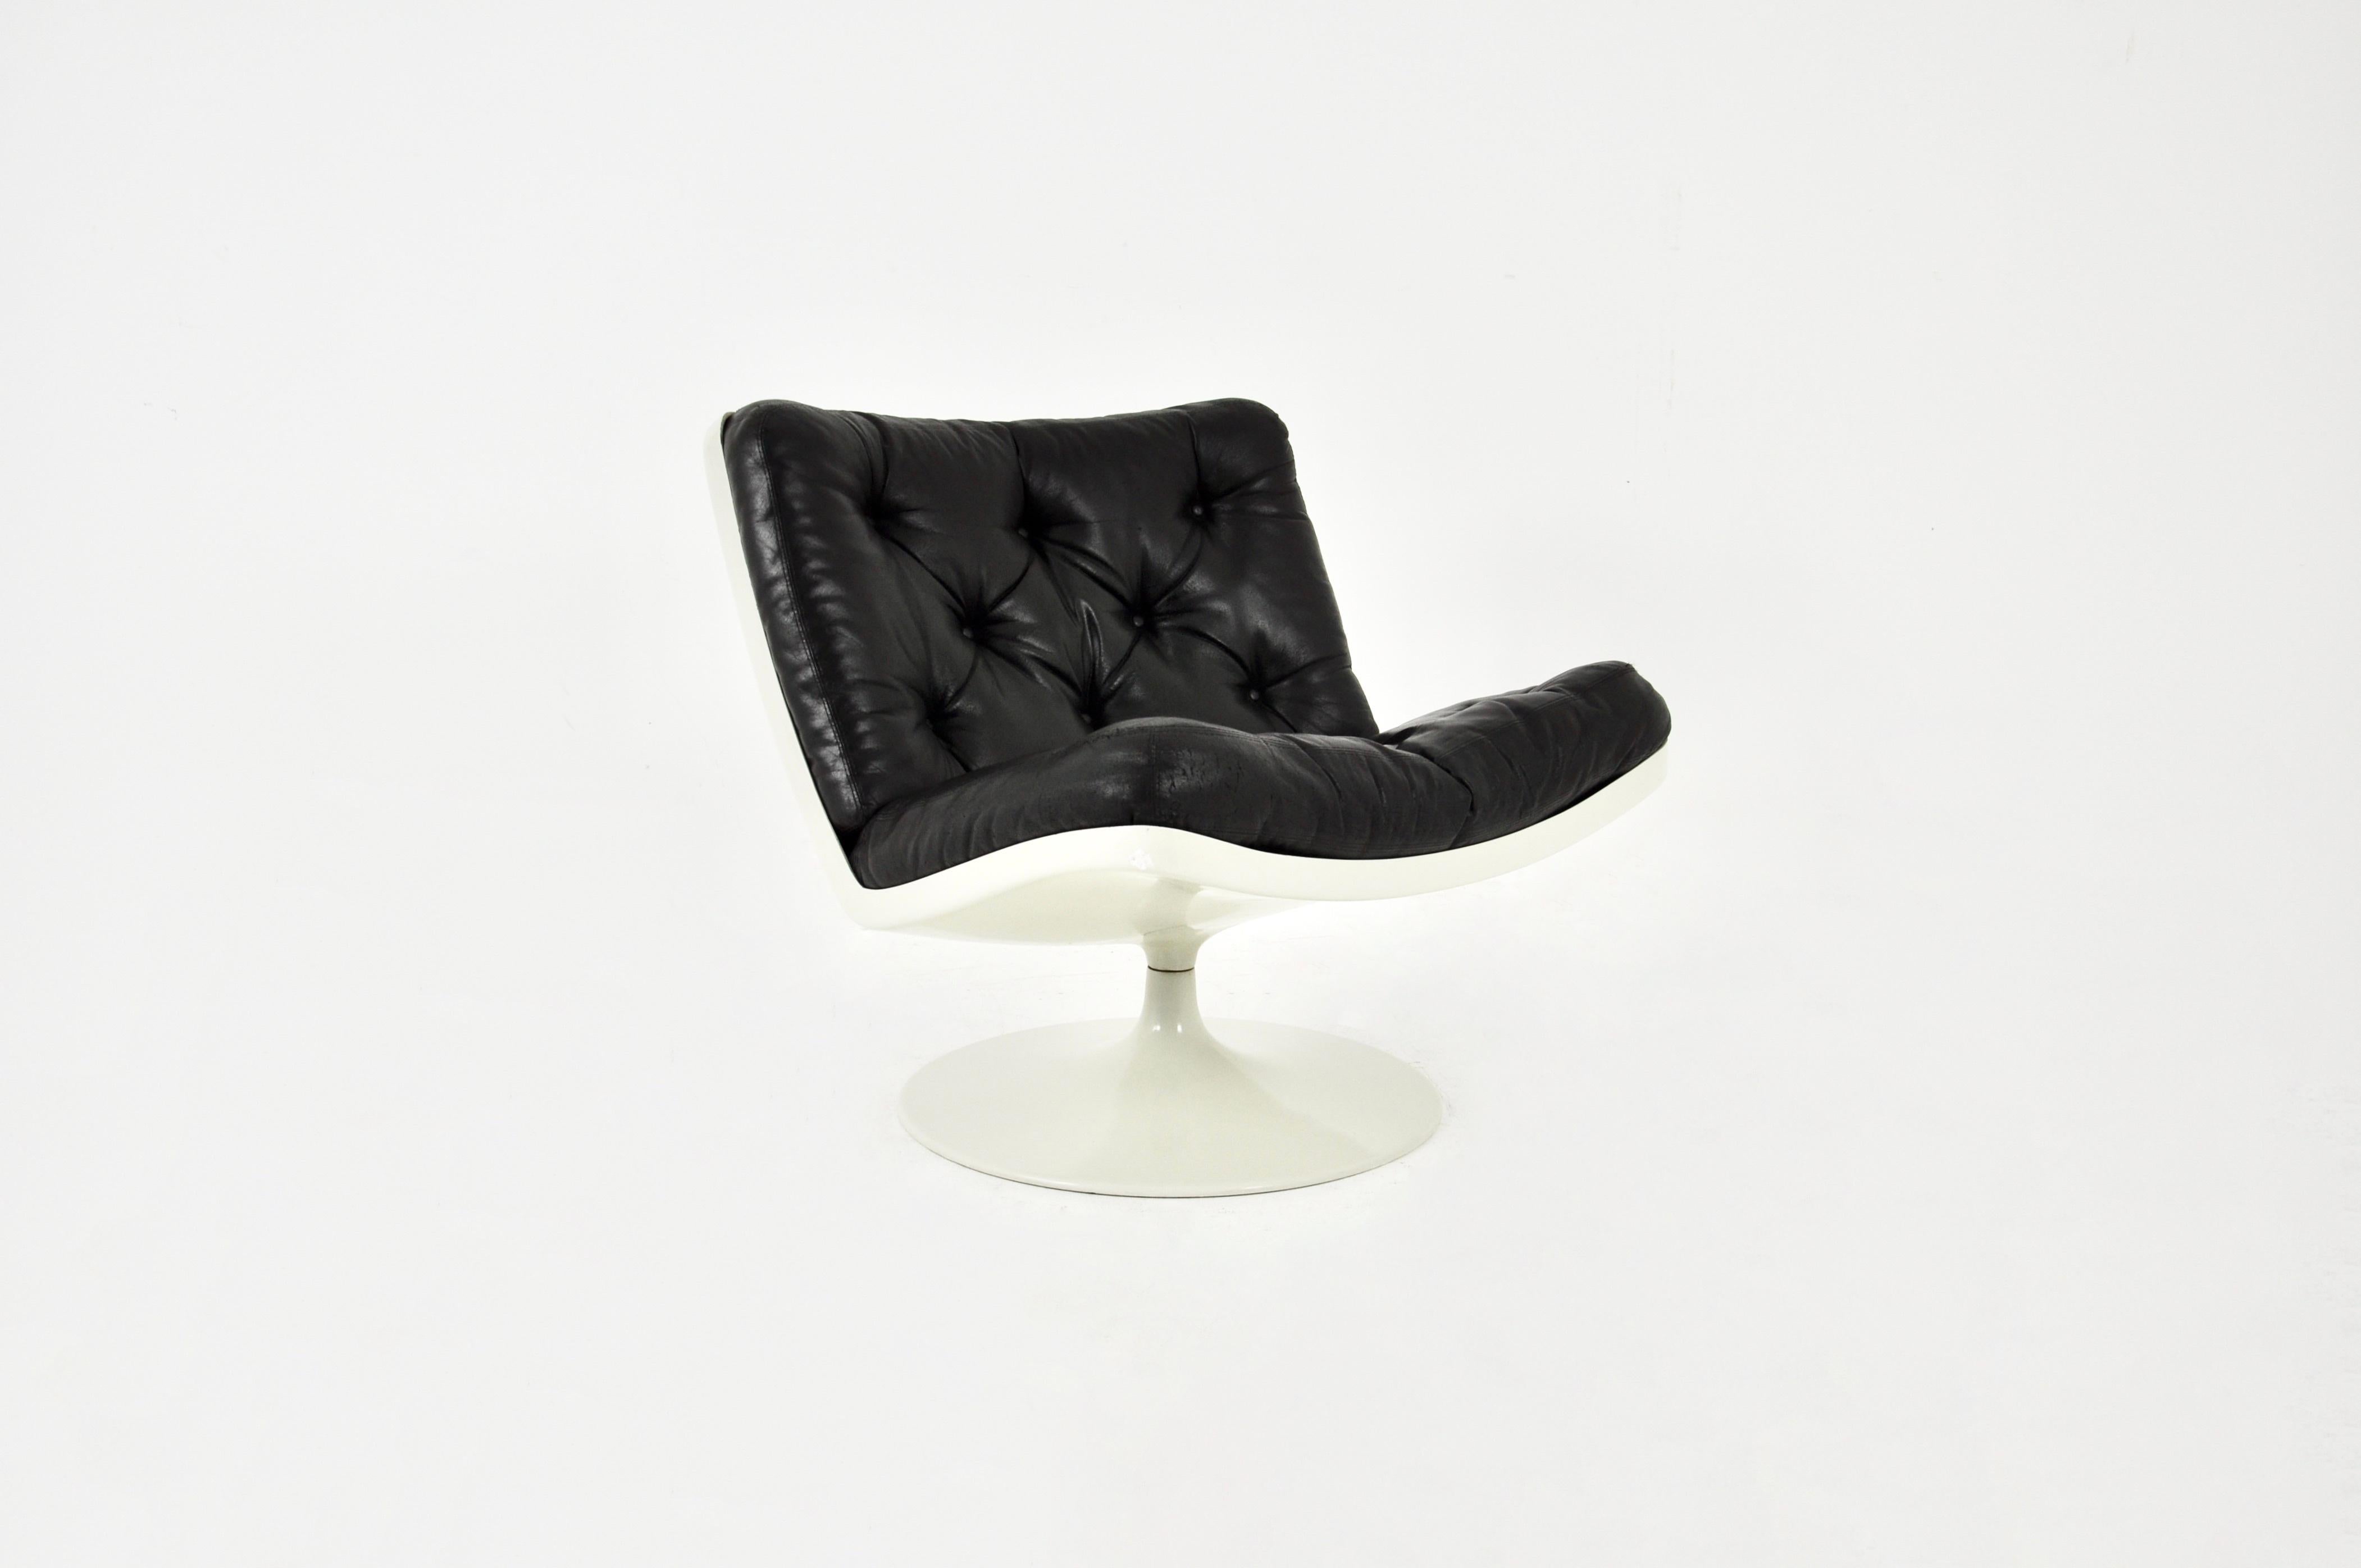 Swivel armchair in leather and plastic shell. Seat height 43cm. Wear due to time and age.